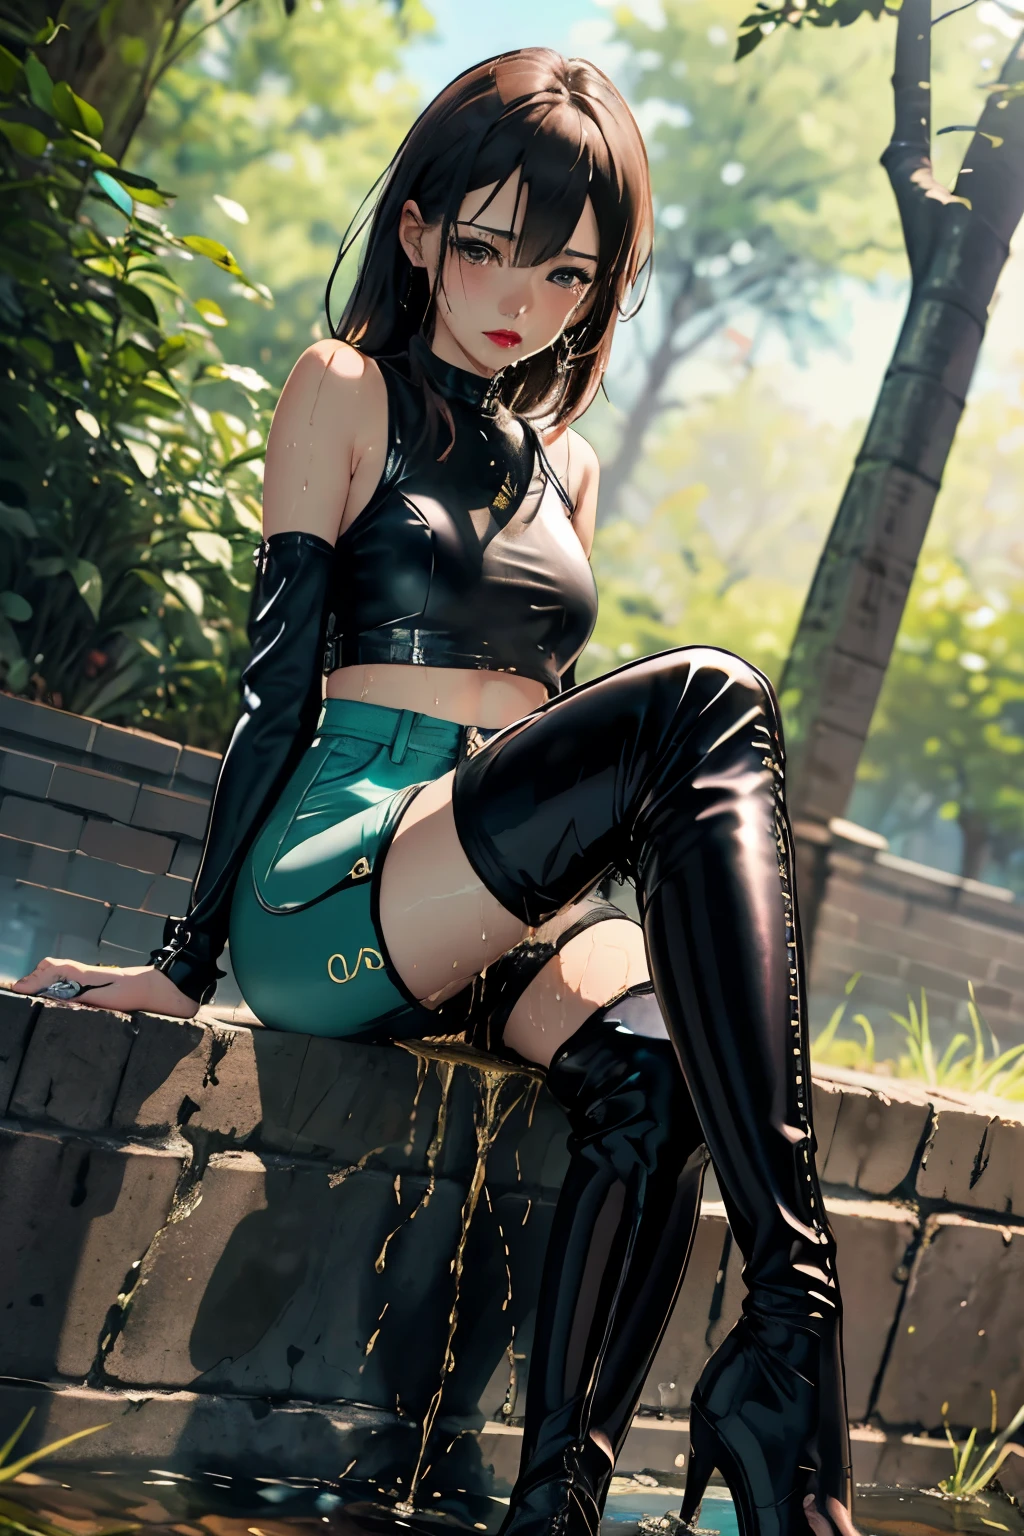 anime, best quality, high quality, highres, beautiful women, high detail, good lighting, lewd, hentai, (no nudity), ((((bike shorts)))), ((tight leather top)), ((((leather thigh high boots)))), bare midriff, (wet shorts), (((wetting herself))), (((peeing herself))), (((peeing self))), (pee streaming down legs), peeing stain, (puddle), (thick thighs), nice long legs, lipstick, detailed face, pretty face, pretty hands, embarrassed blushing face, humiliated, (((outdoors))), (((sitting legs crossed))), hihelz